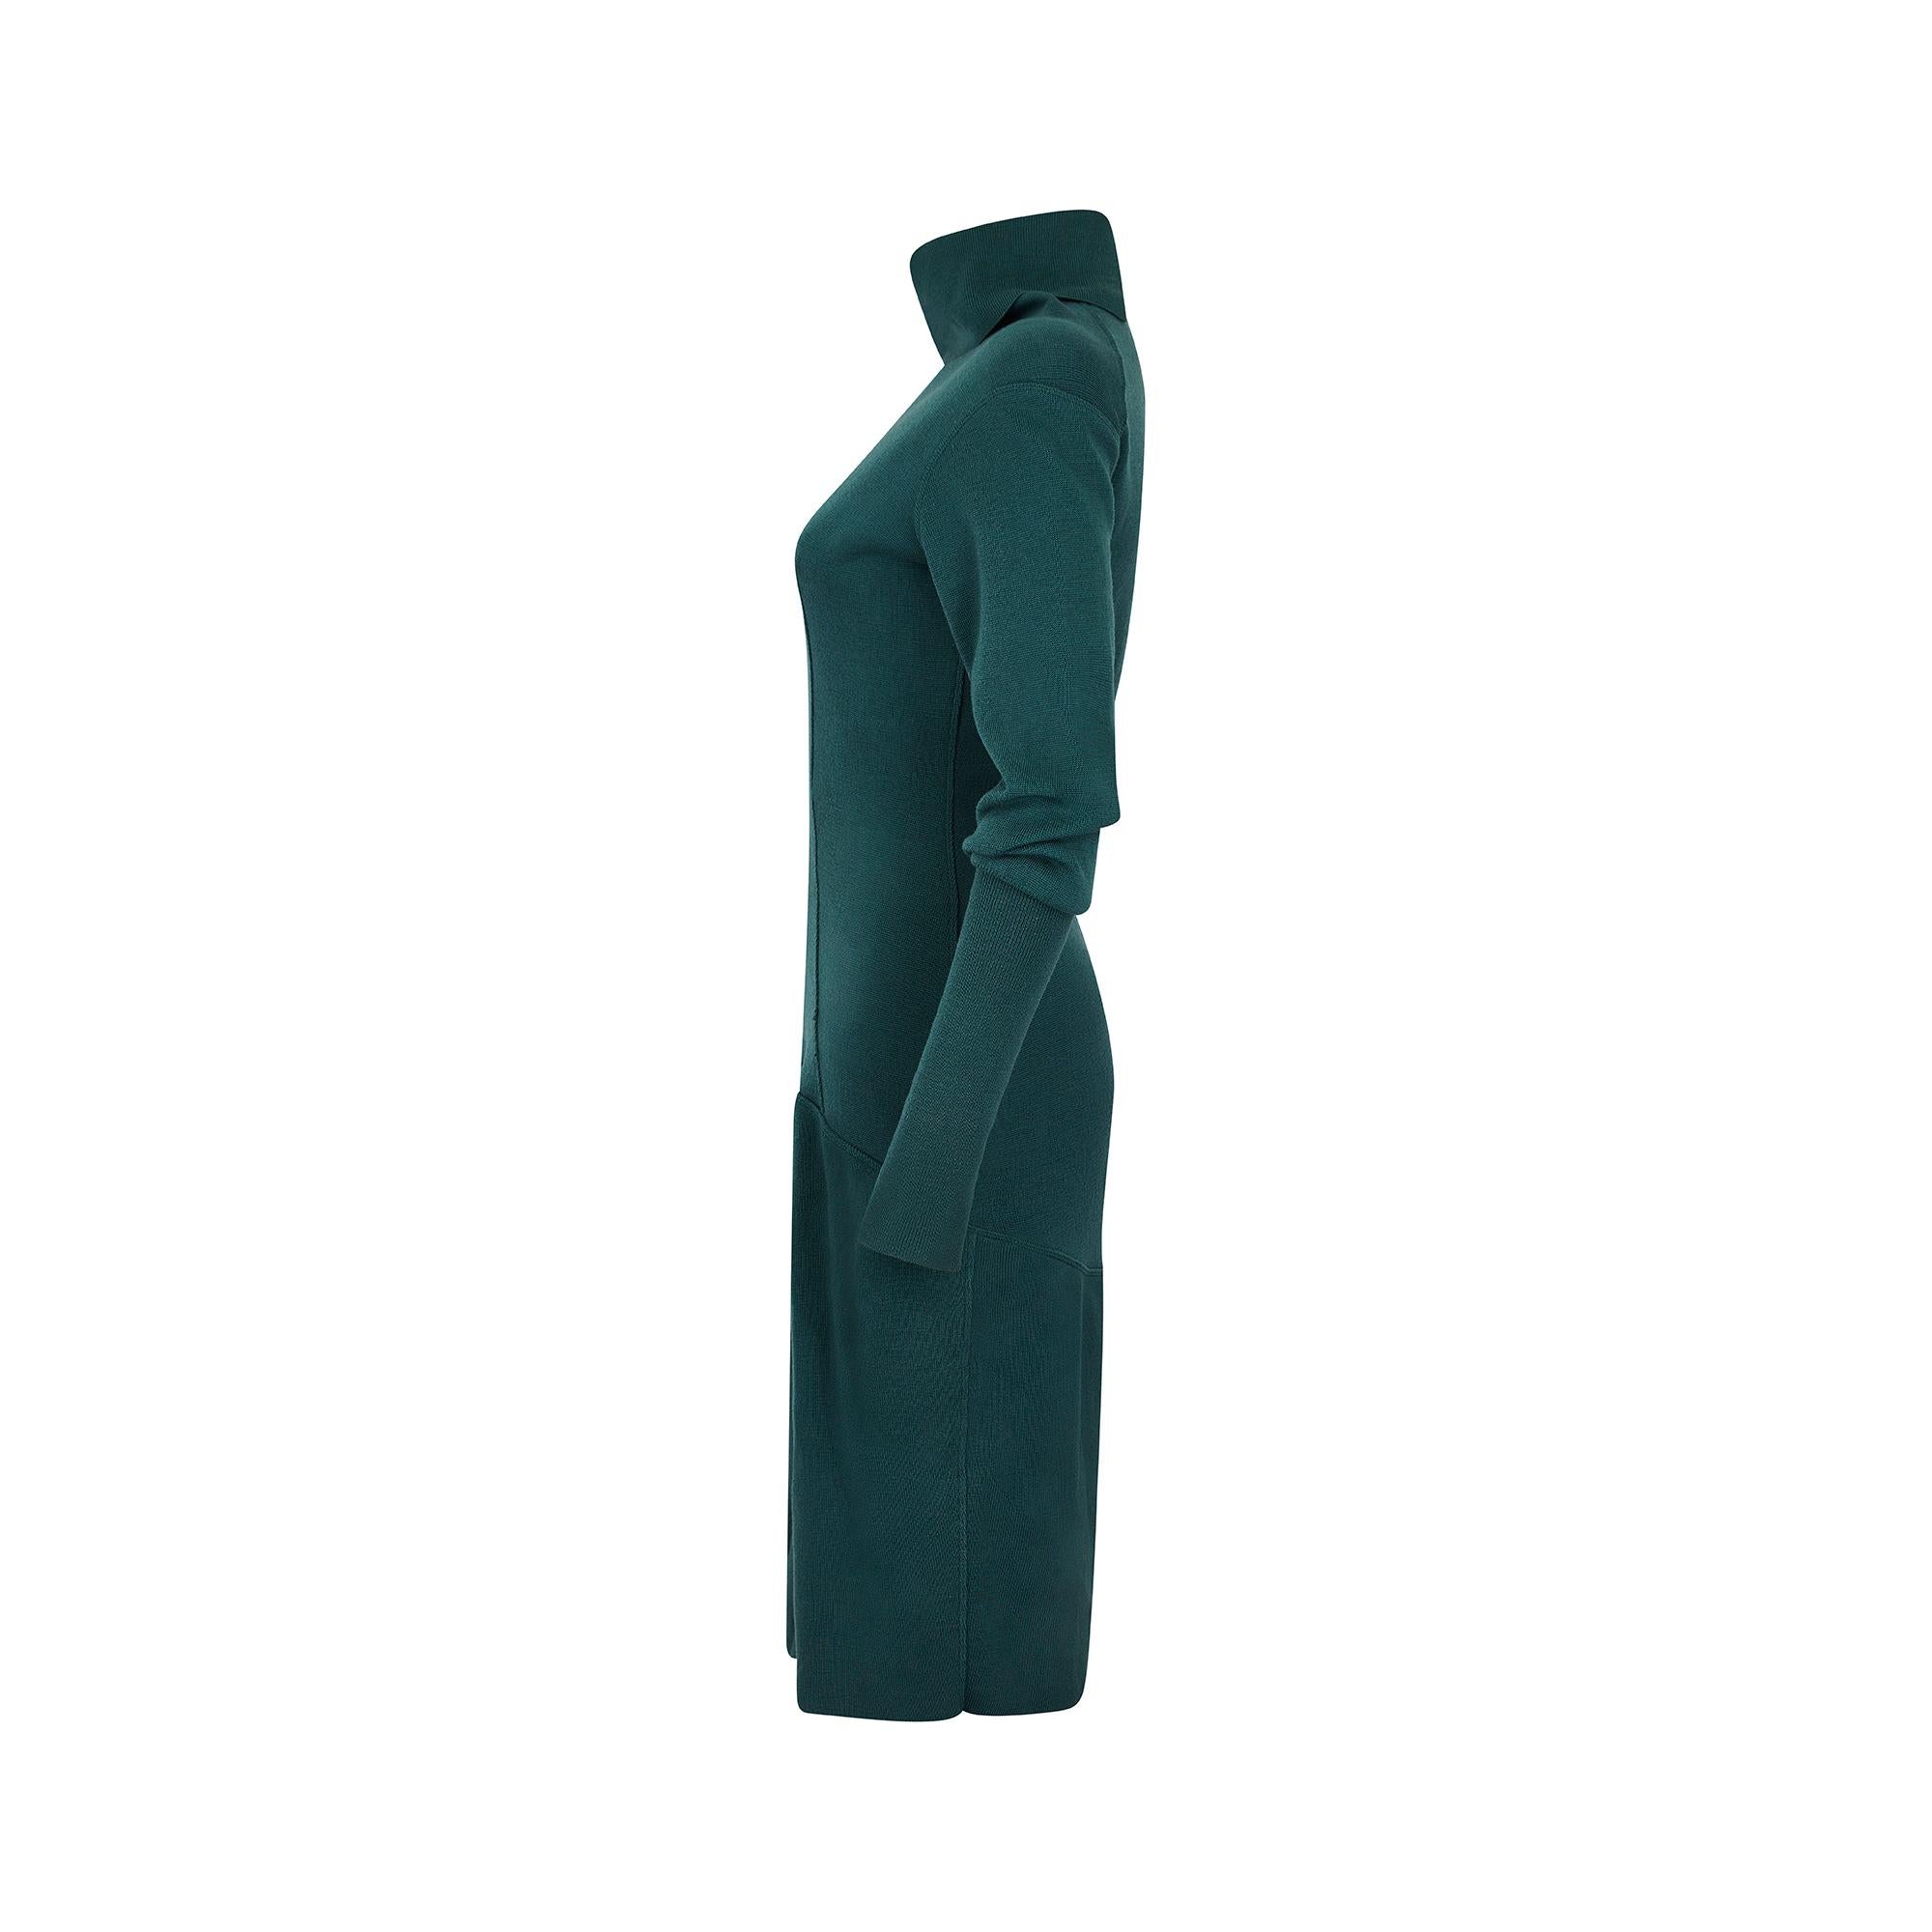 1980s Alaia Wool Teal Green Bodycon Dress In Excellent Condition For Sale In London, GB